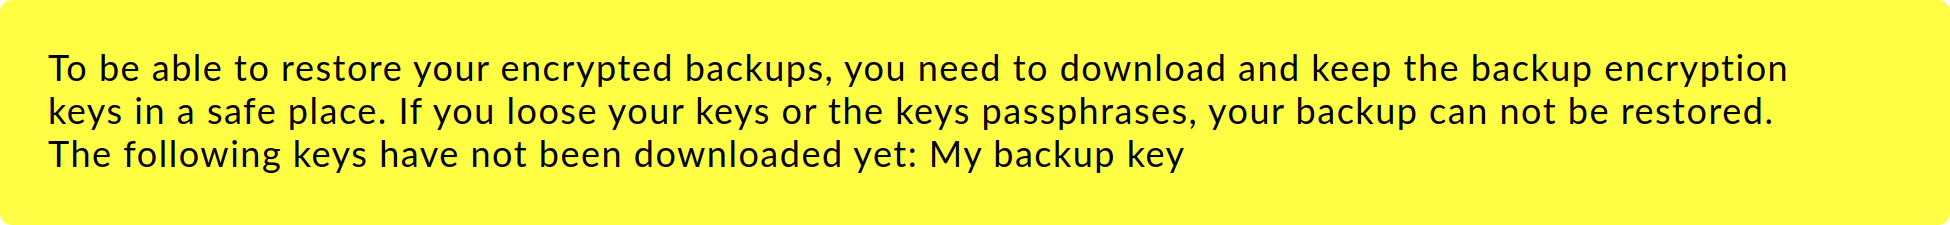 Message informing that the backup keys have not yet been downloaded.